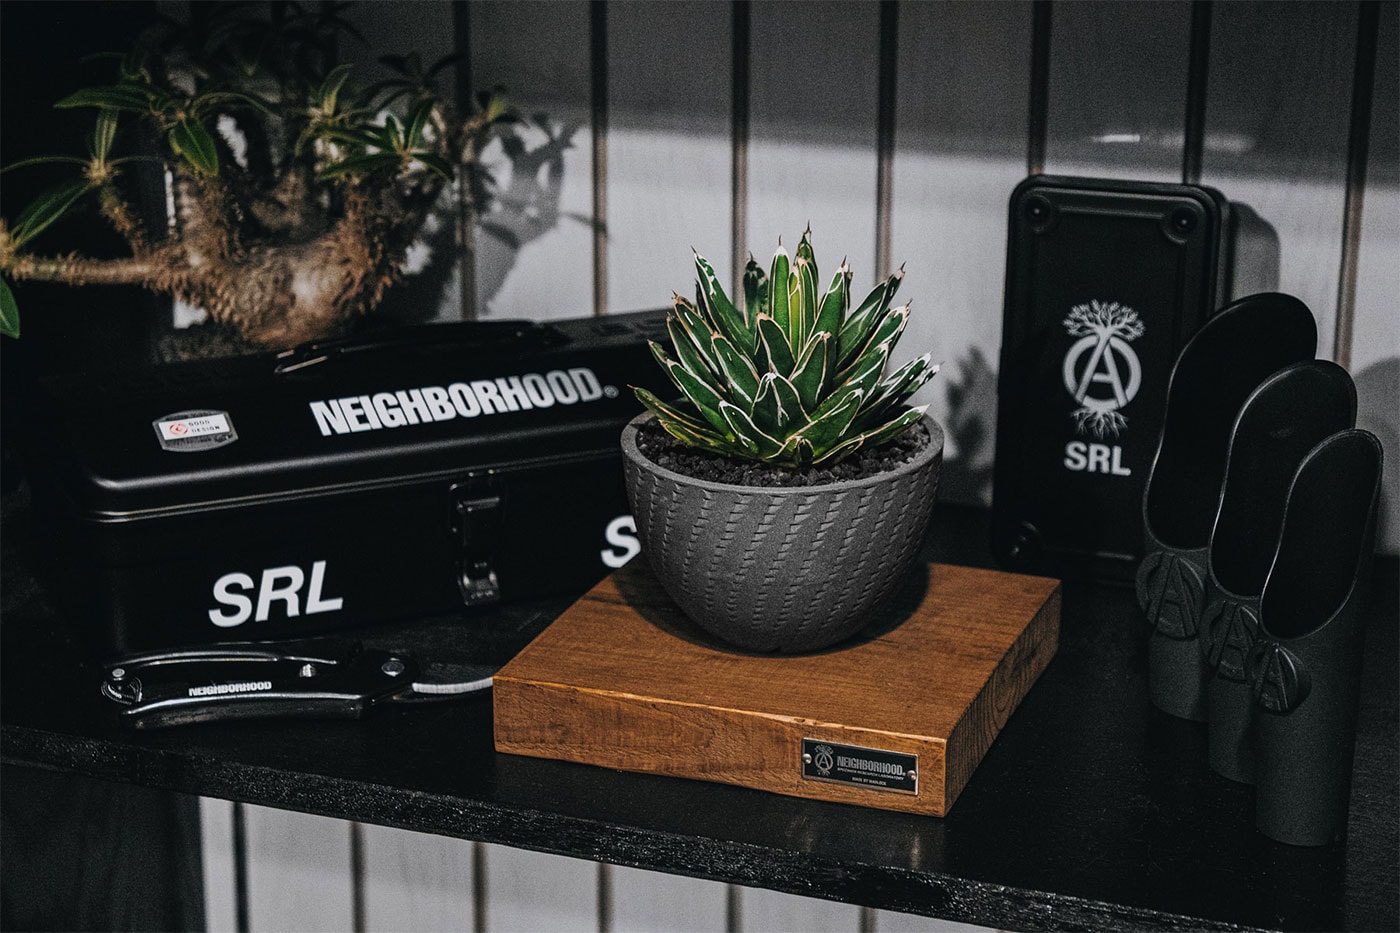 Closer Look at Neighborhood SRL Collection HBX Release Info Buy Plant Care Ceramic Pot Wood Board Garden Clippers Soil Scoops Toolboxes